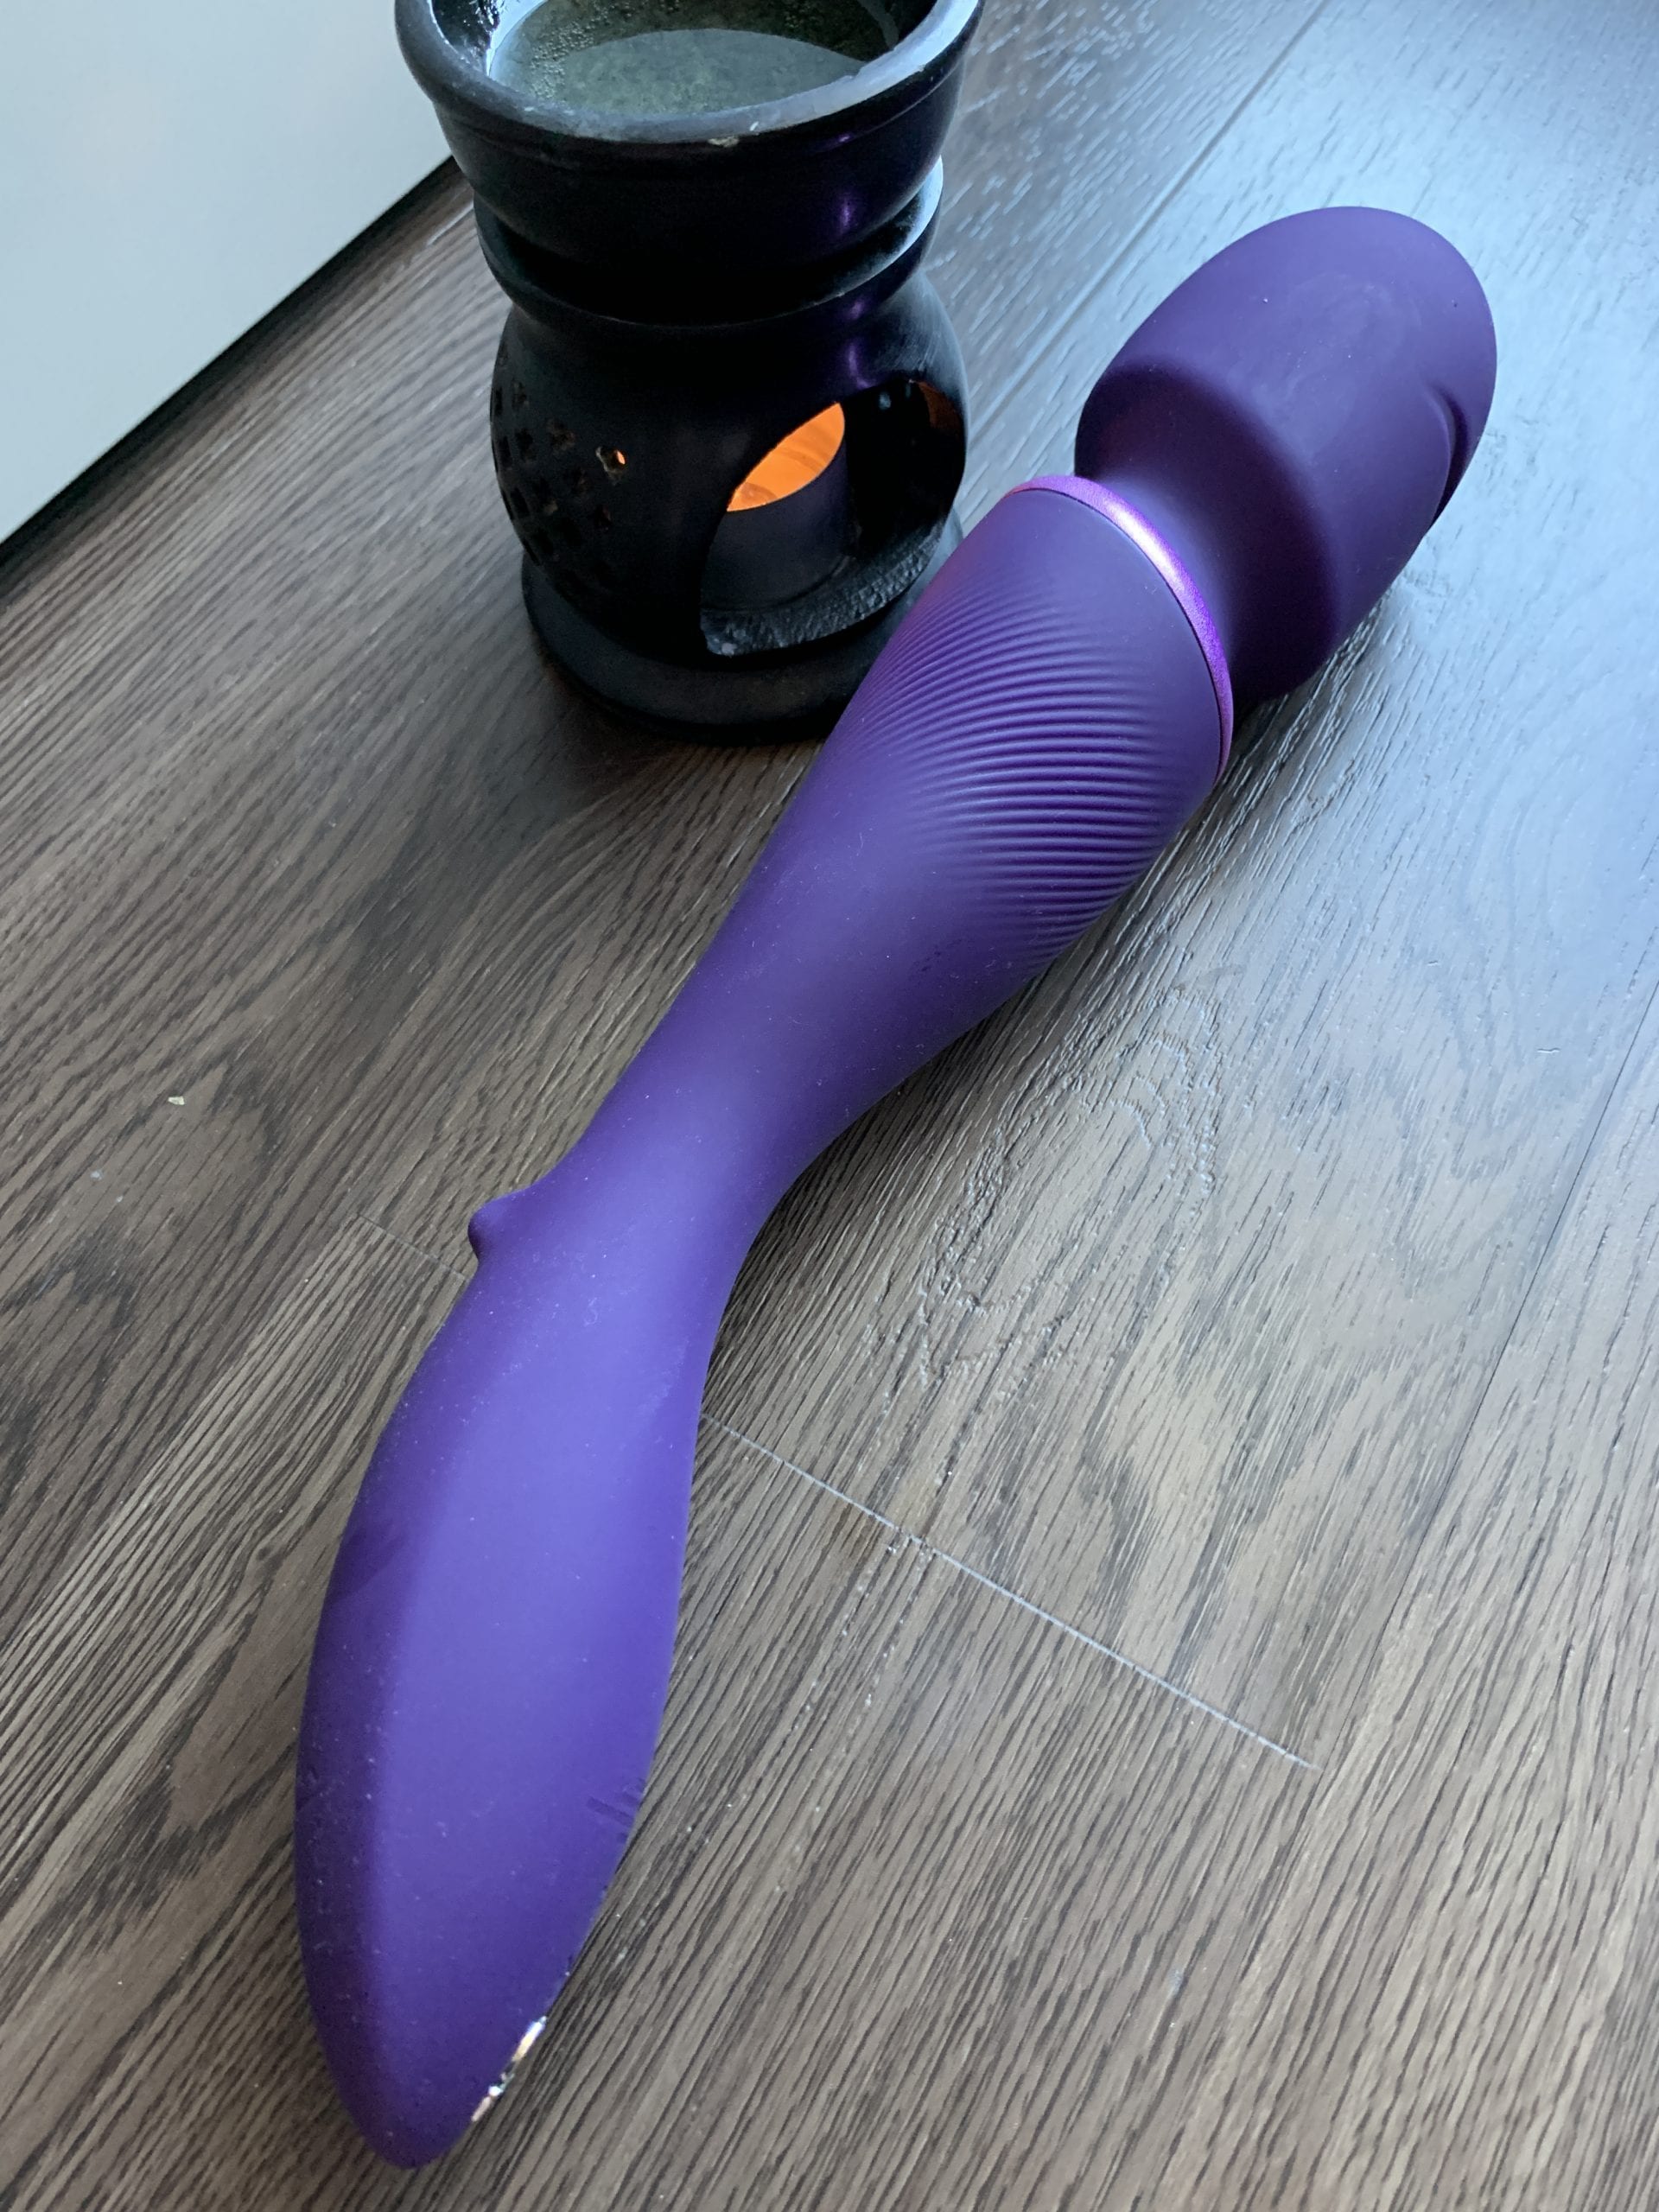 REVIEW: We-Vibe Wand